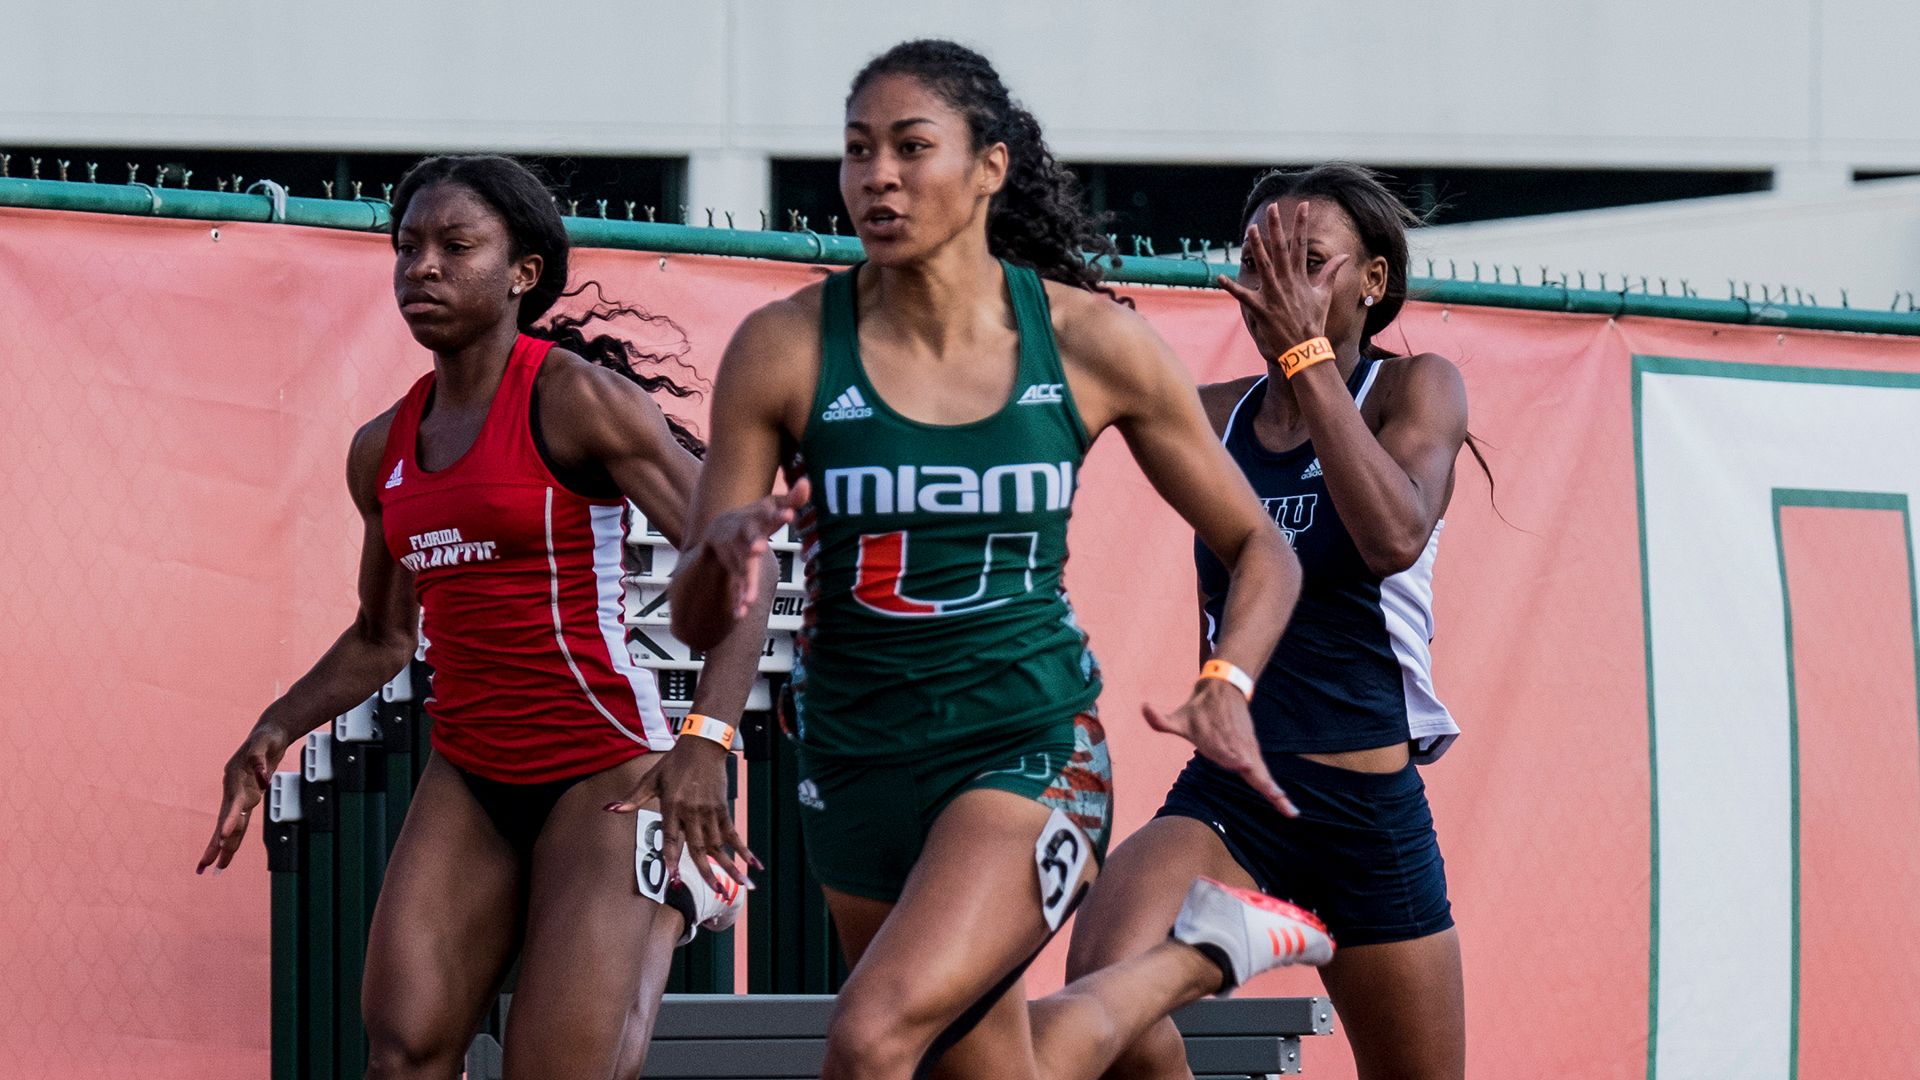 Track Opens Outdoors at Hurricane Invitational